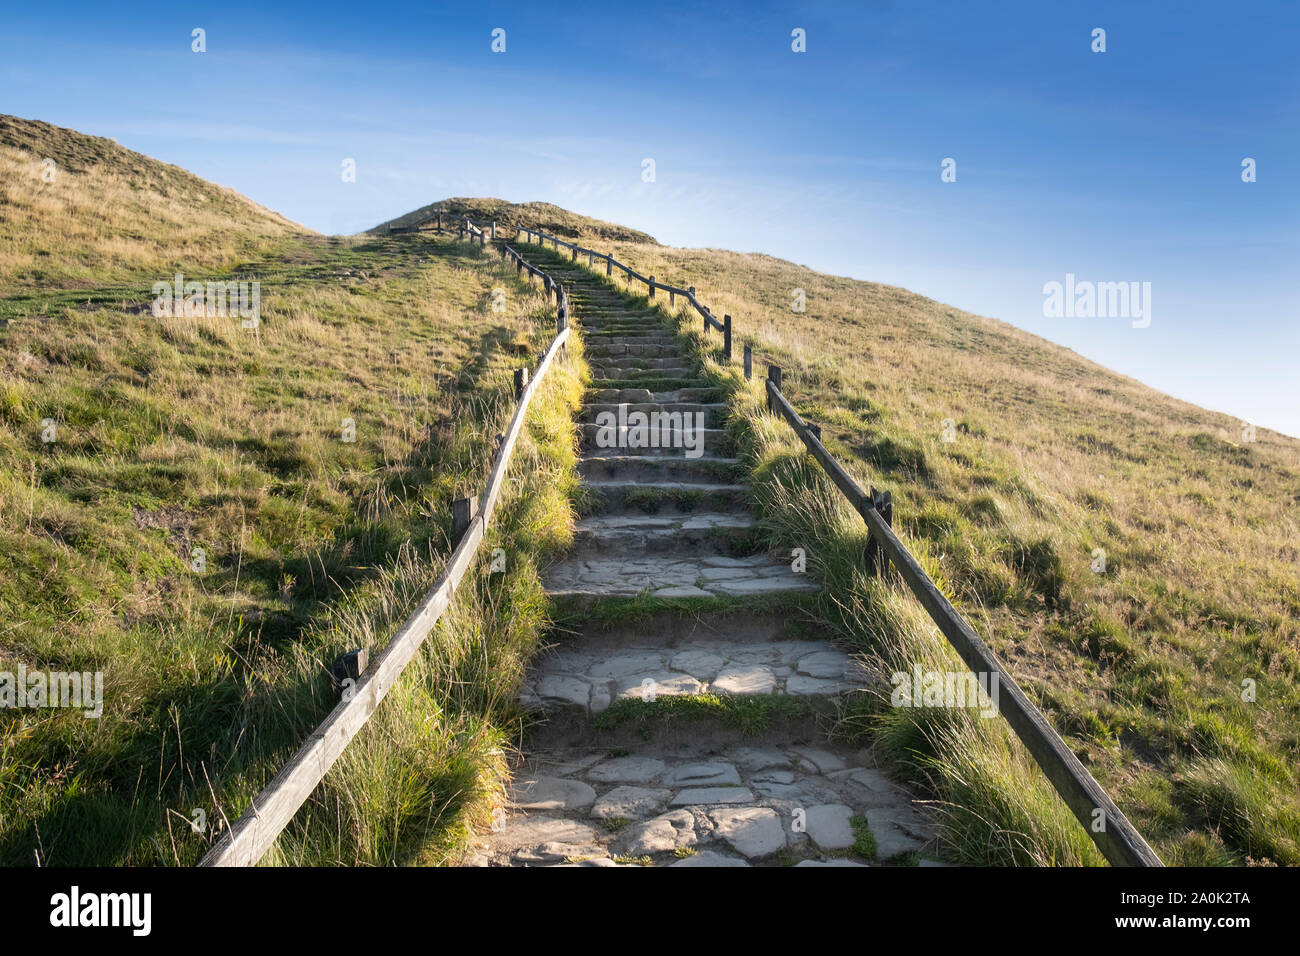 Stone steps leading up hill, journey concept of one step at a time Stock Photo